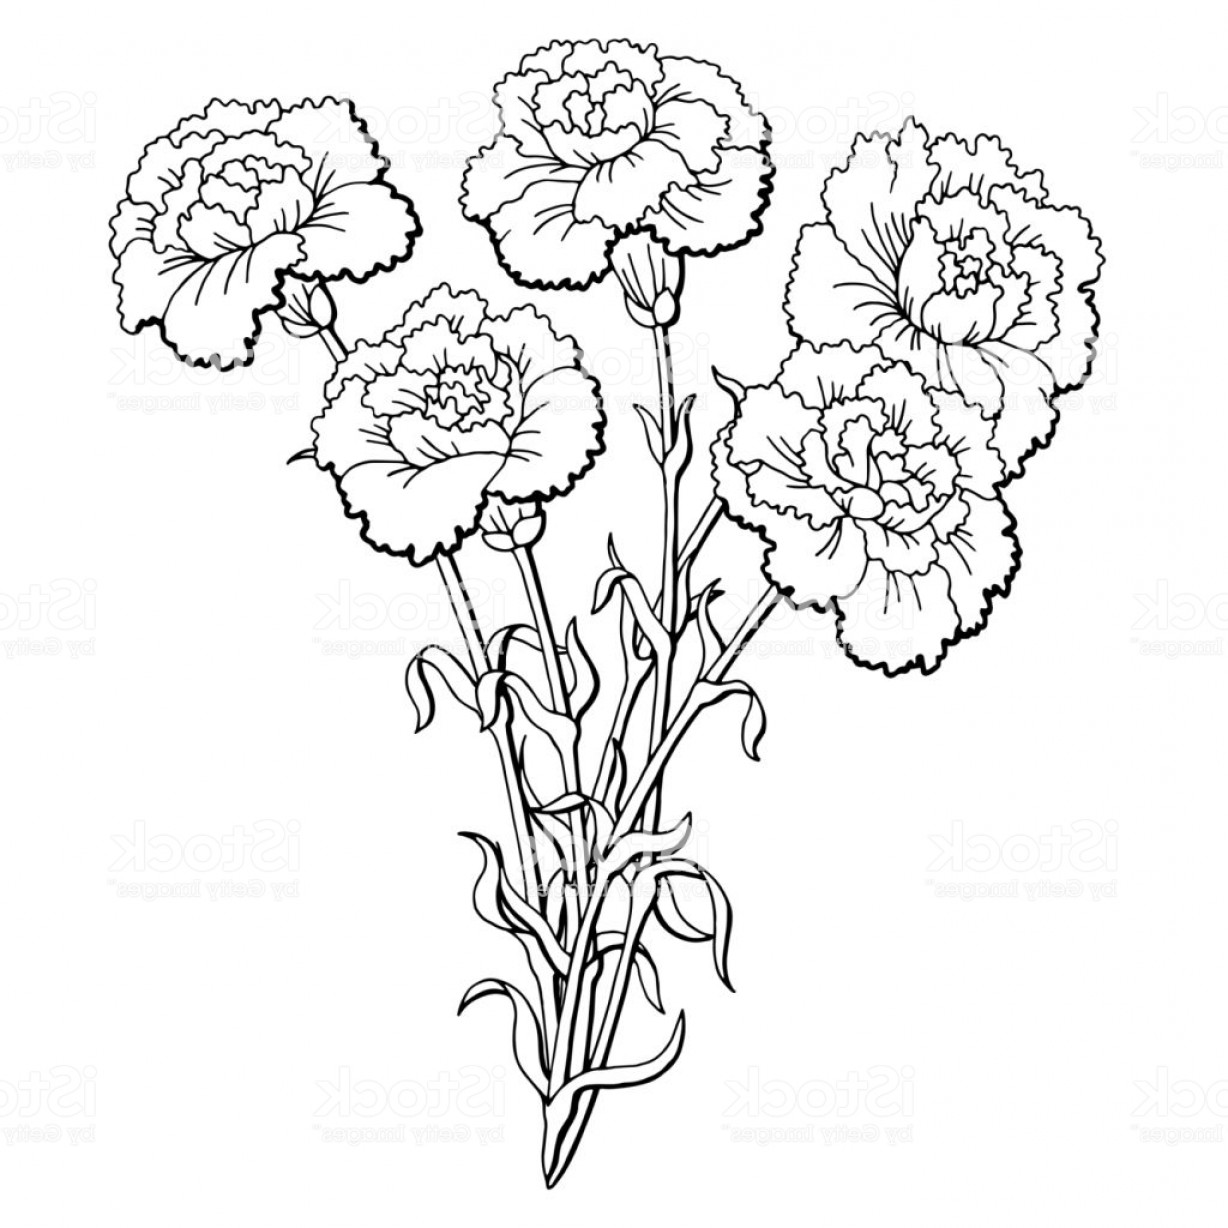 Easy Simple Carnation Drawing - www.inf-inet.com